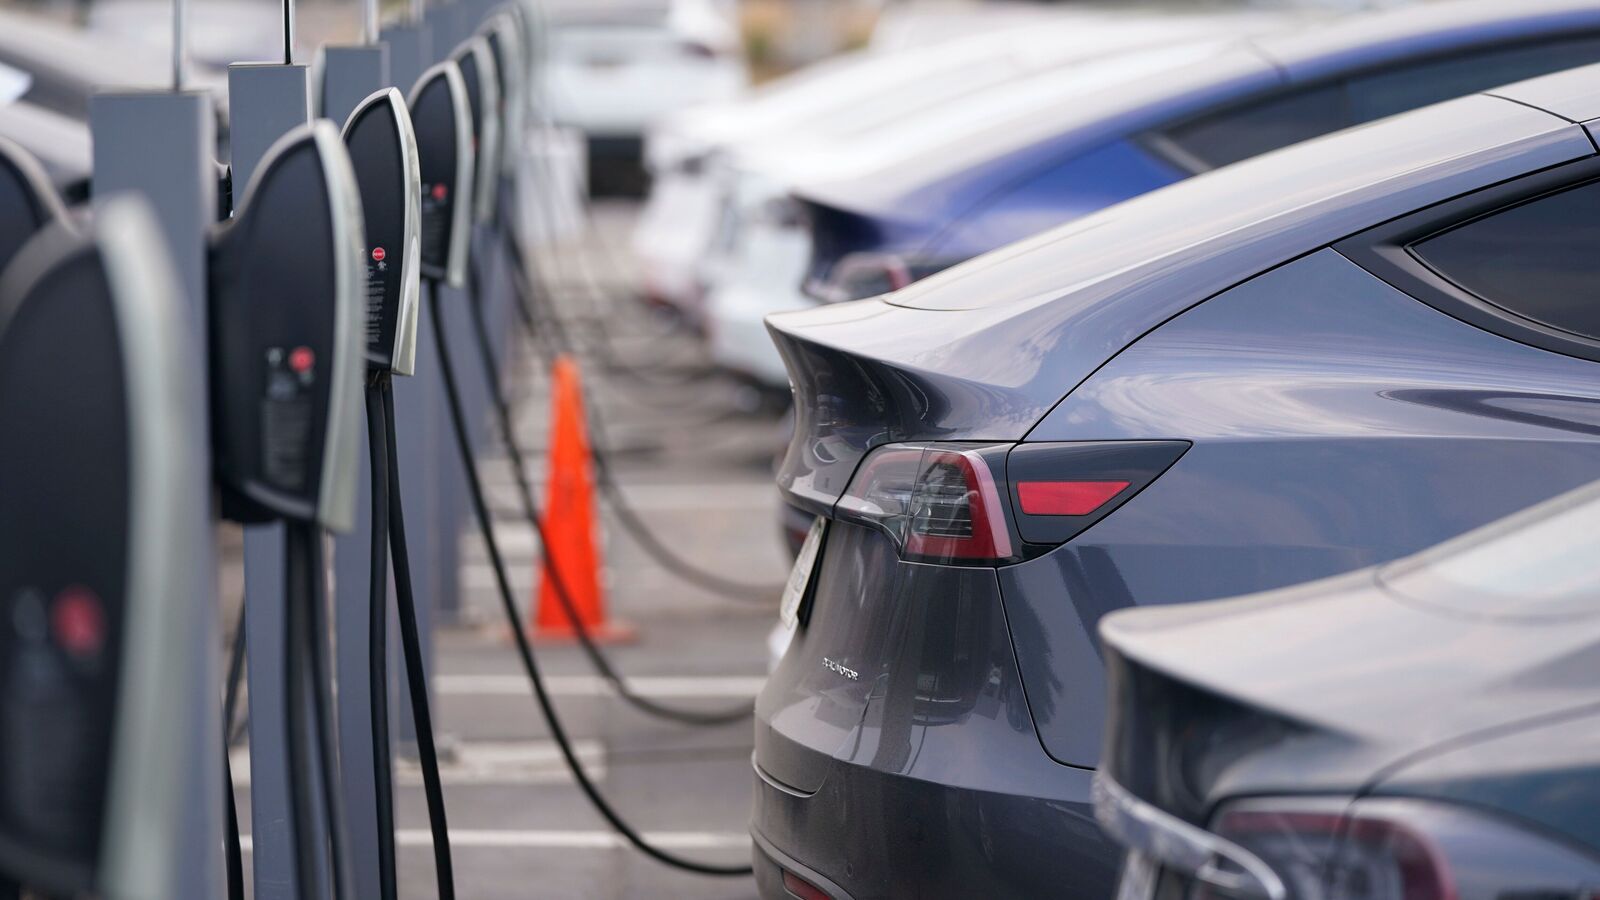 America’s EV incentives change from New Year’s Eve New tax credit